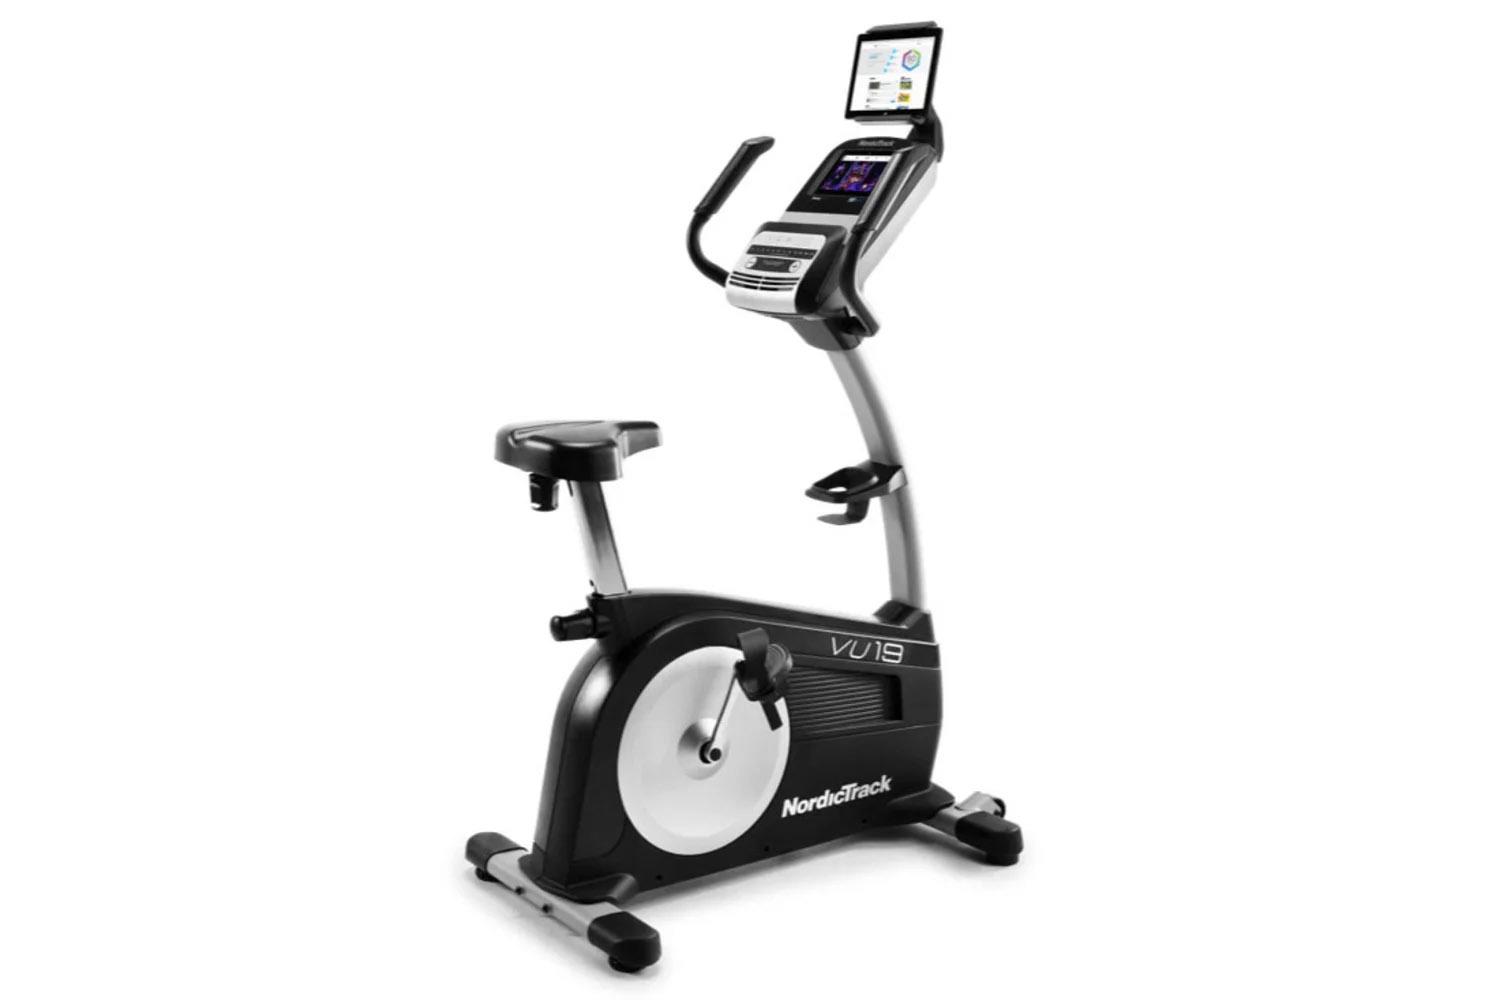 The Commercial VU19 Stationary Bike includes 28 workouts and can be used with iFit. Given its 19-­pound drive, this machine can support great cardio workouts.